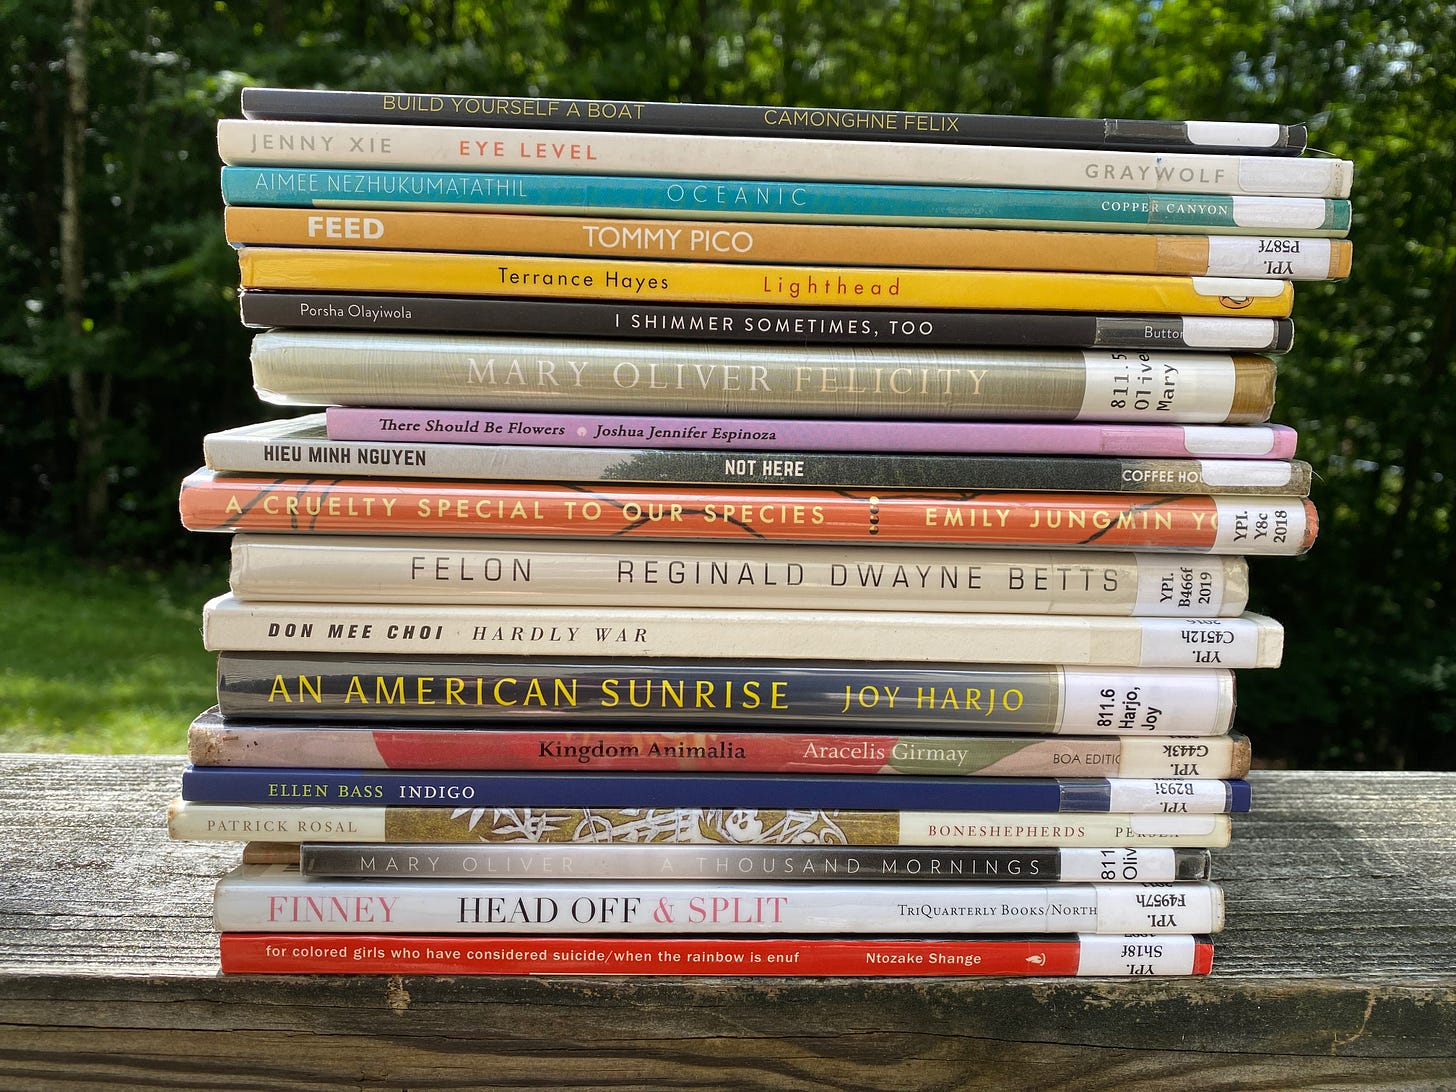 A large stack of poetry books from the library, sitting on a porch railing. They include: for colored girls who have considered suicide/when the rainbow is enuf, Head Off & Spit, A Thousand Mornings, Boneshepards, Indigo, Kingdom Animalia, An American Sunrise, Hardly War, Felon, A Cruelty Special to Our Species, Not Here, There Should be Flowers, Felicity, I Shimmer Sometimes, Too, Lighthead, Feed, Oceanic, Eye Level, and Build Yourself a Boat.